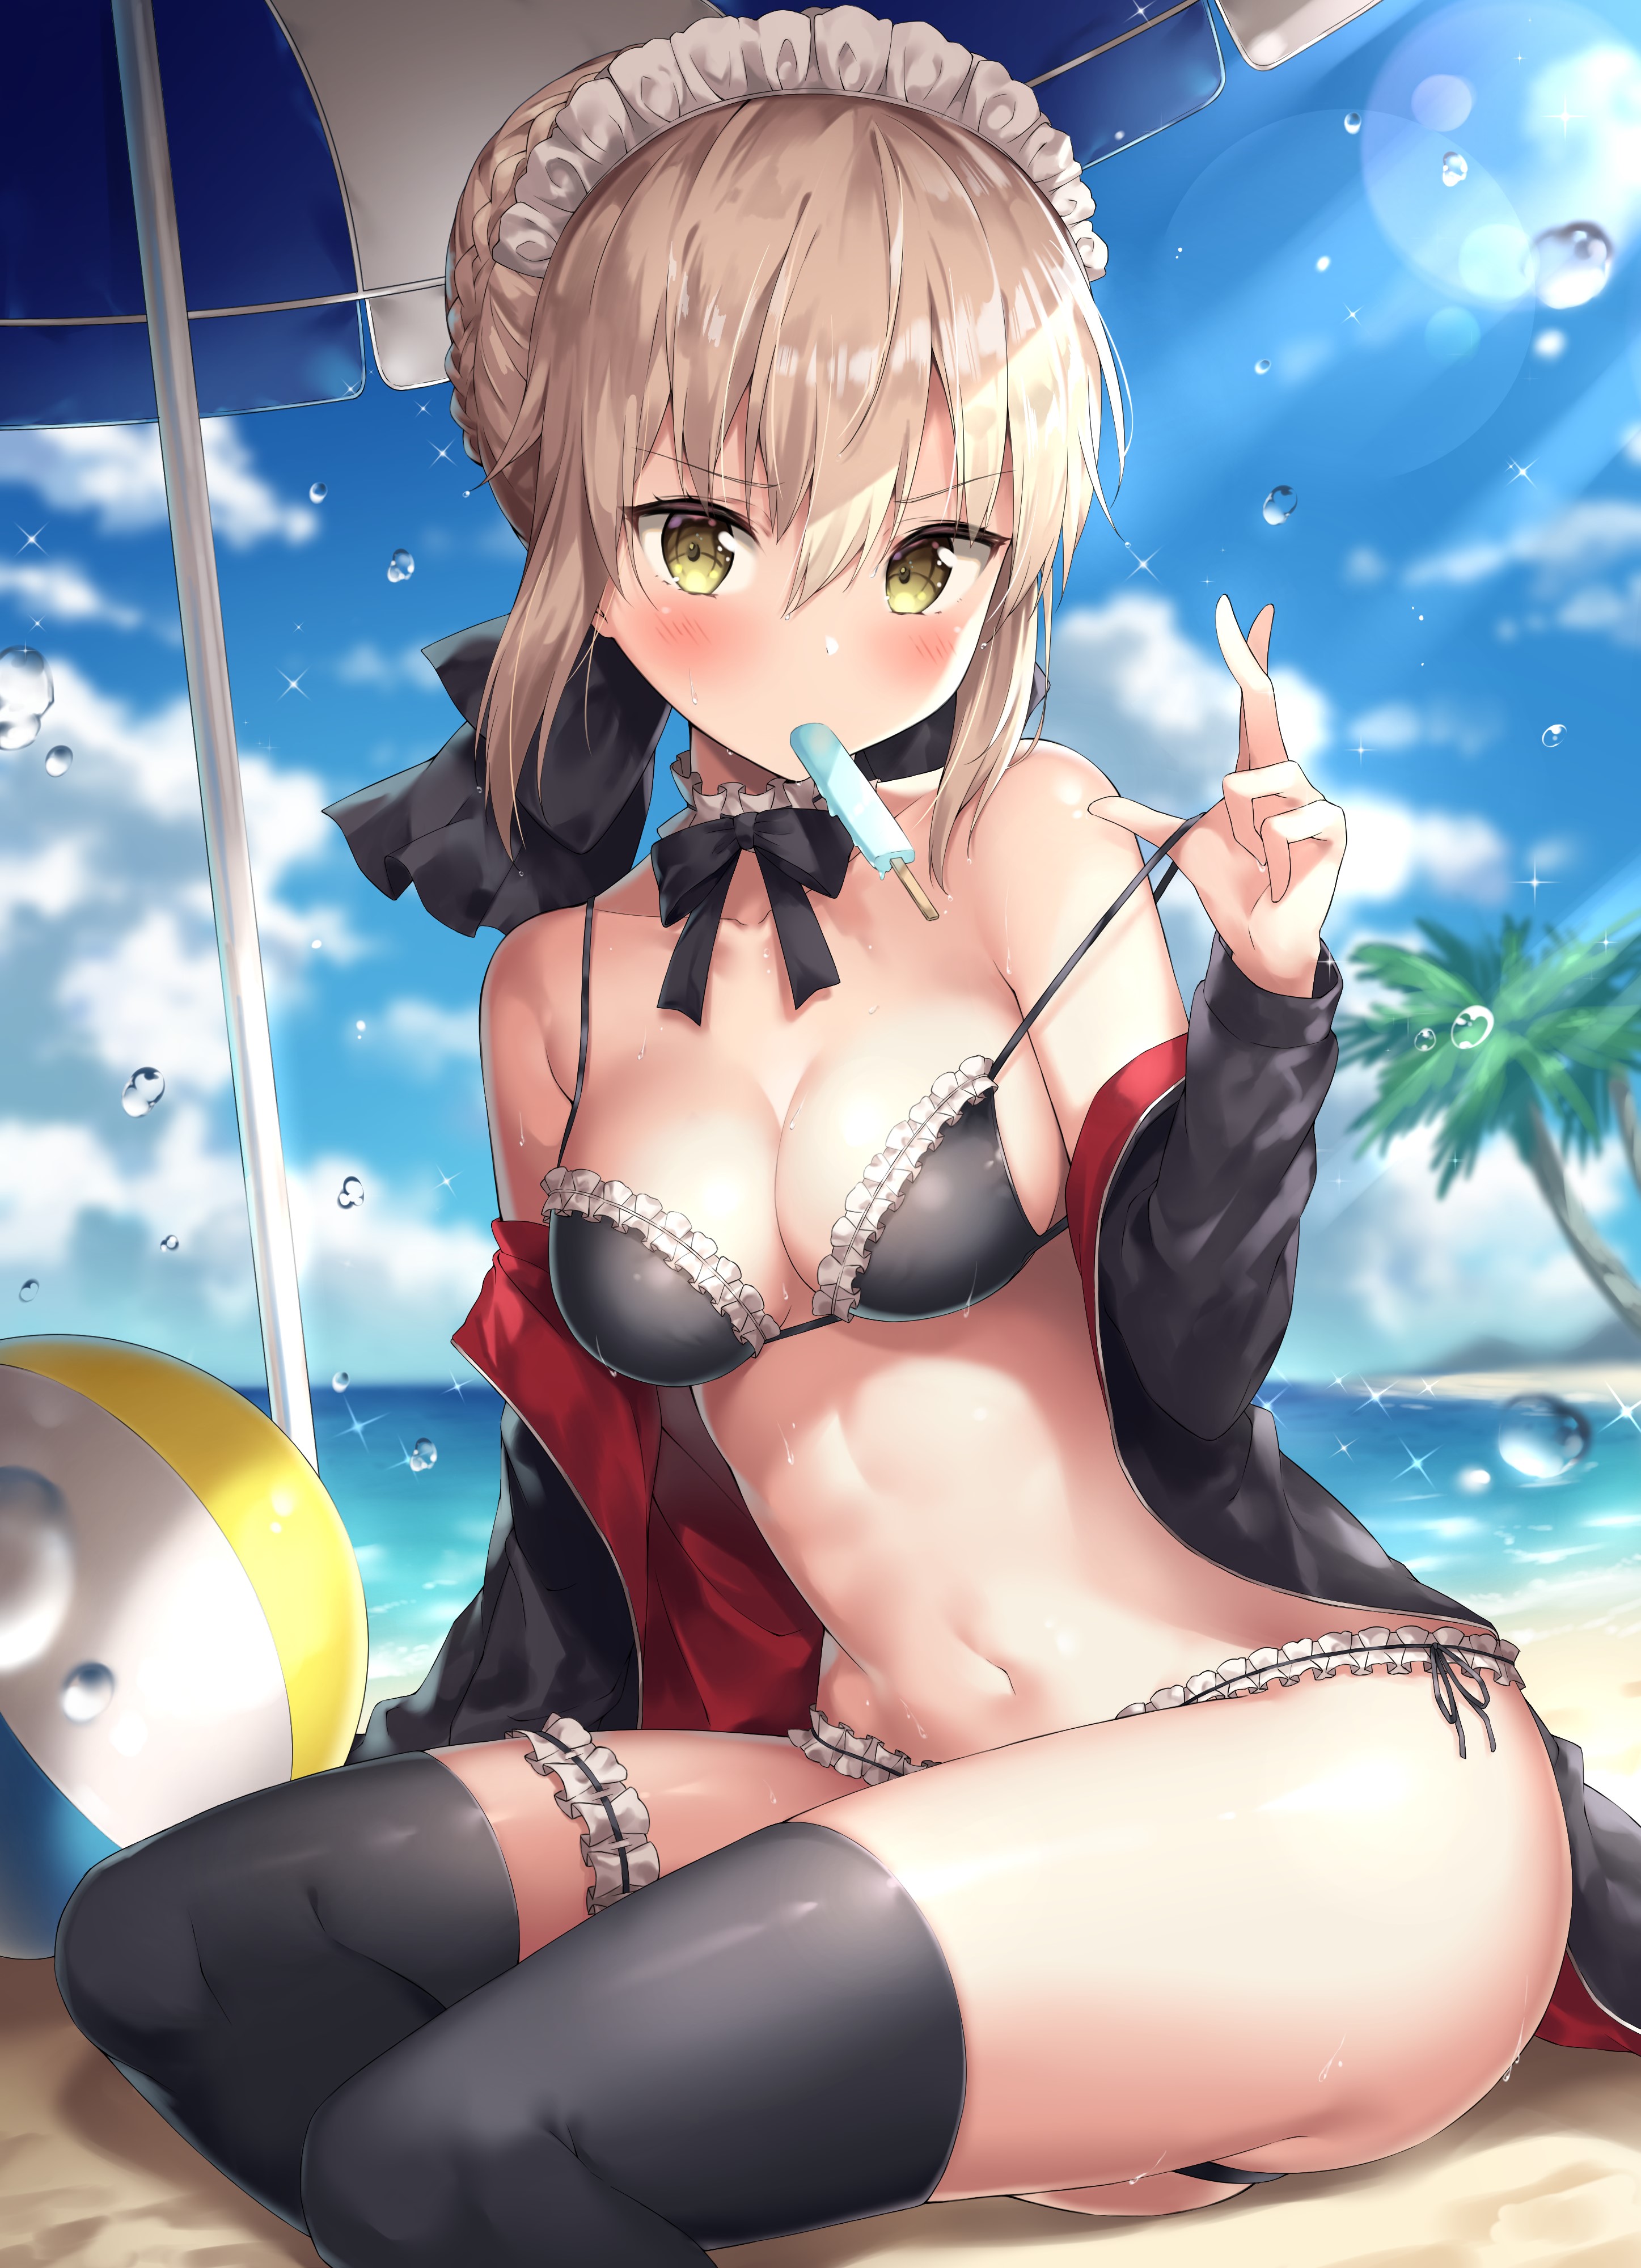 Anime 2894x4000 anime anime girls digital art artwork 2D portrait display Fate series yellow eyes blonde beach popsicle food sweets Ale Nqki Fate/Grand Order Artoria Pendragon Artoria Pendragon(Rider) thigh-highs open jacket maid outfit maid bikini pulling clothing cleavage palm trees ice cream parasol beach ball water drops boobs looking at viewer blushing